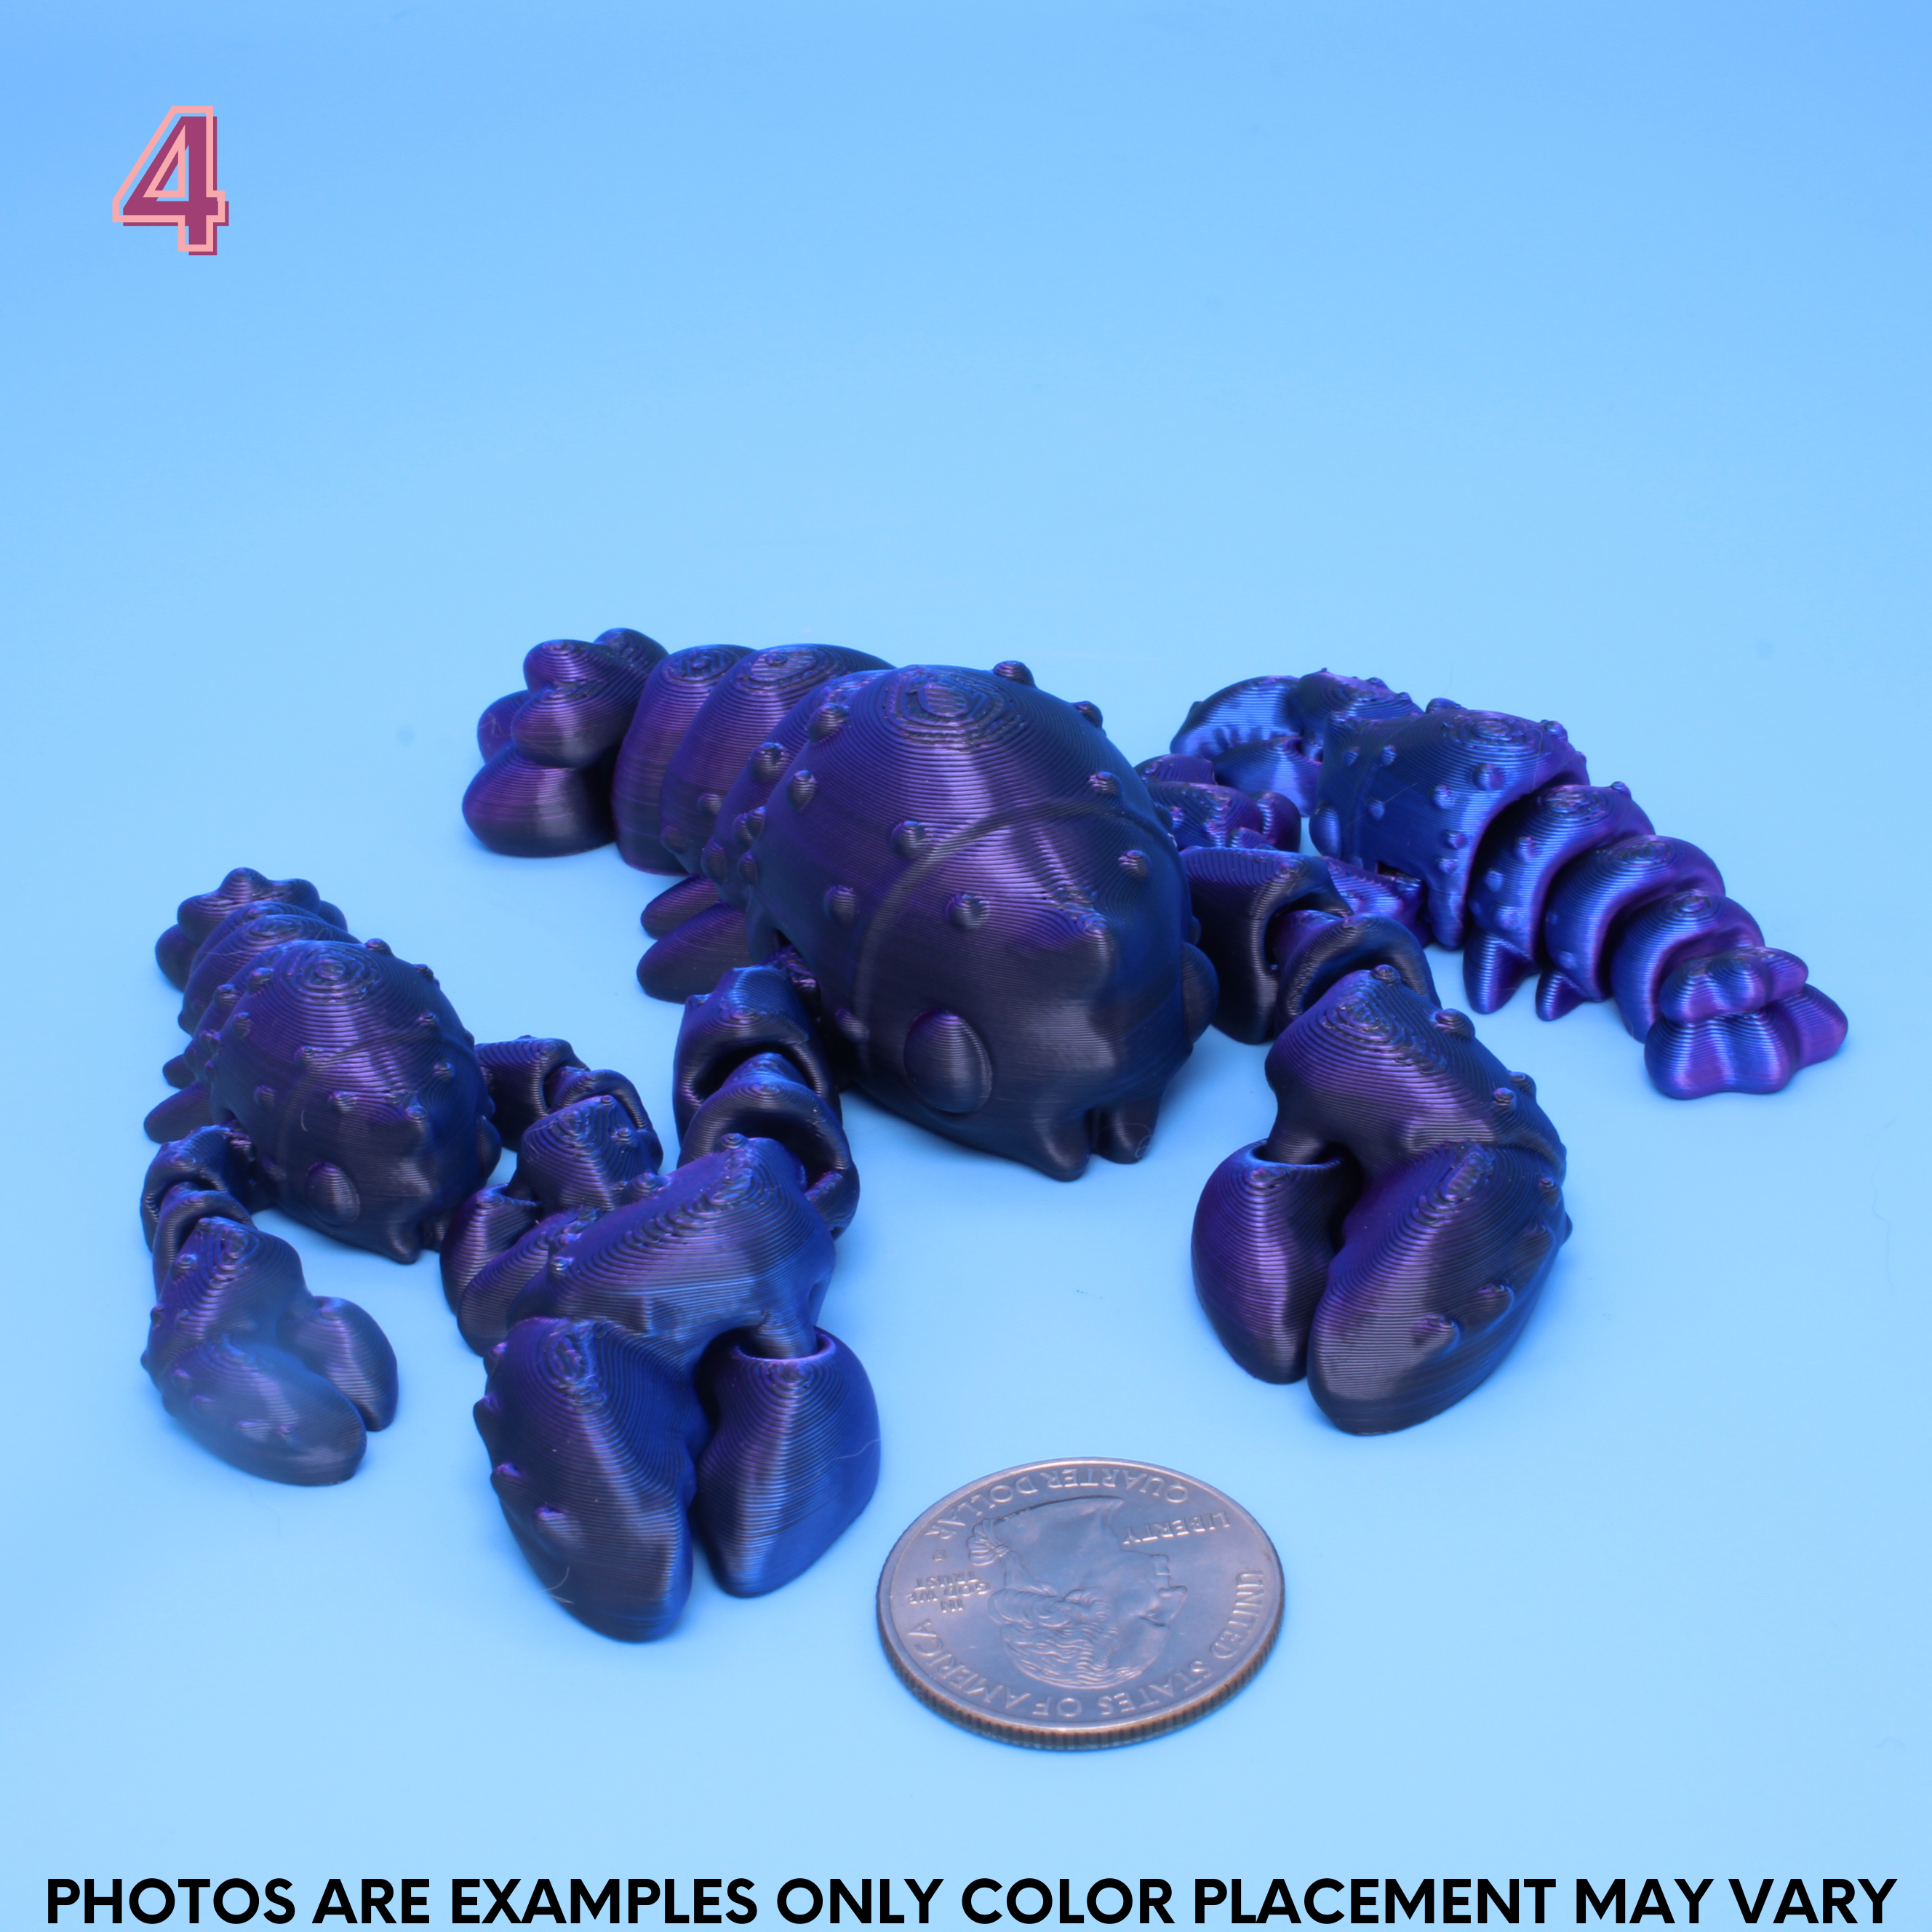 black, blue, purple lobster mama and 2 small baby lobsters